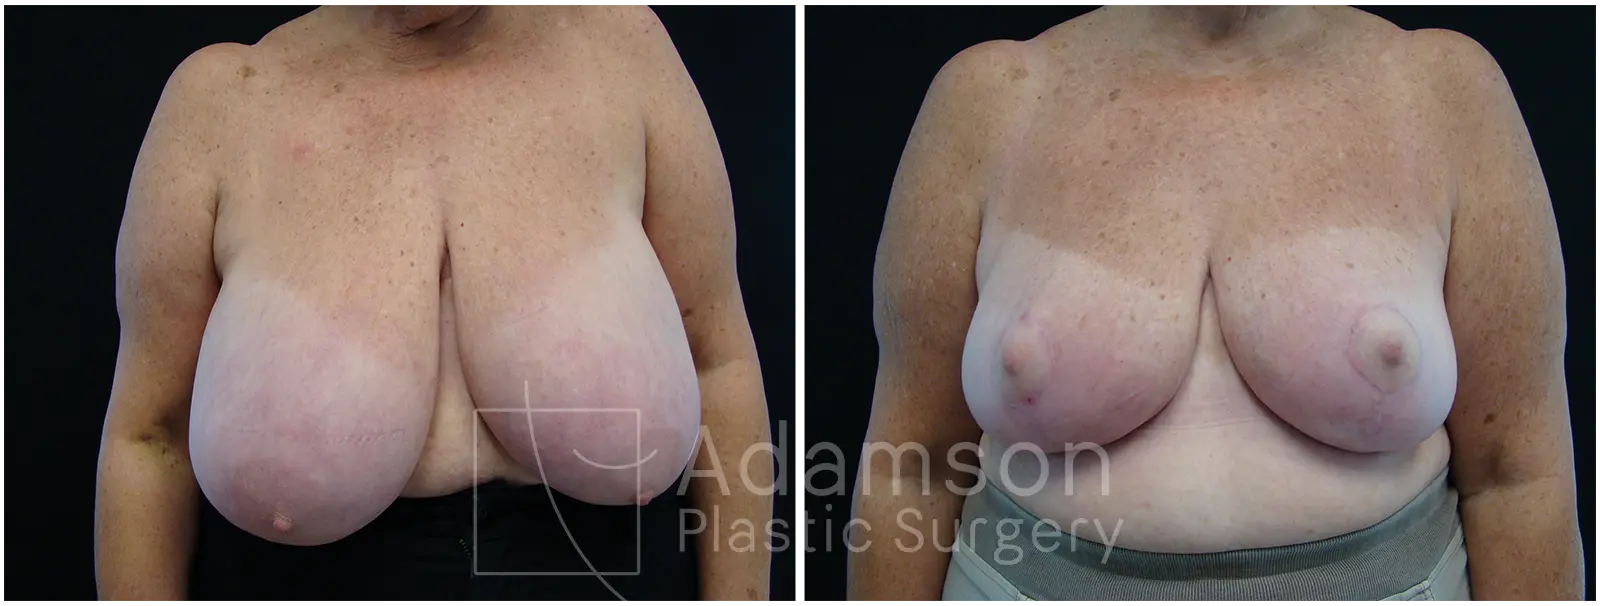 Breast Lift Reduction PC